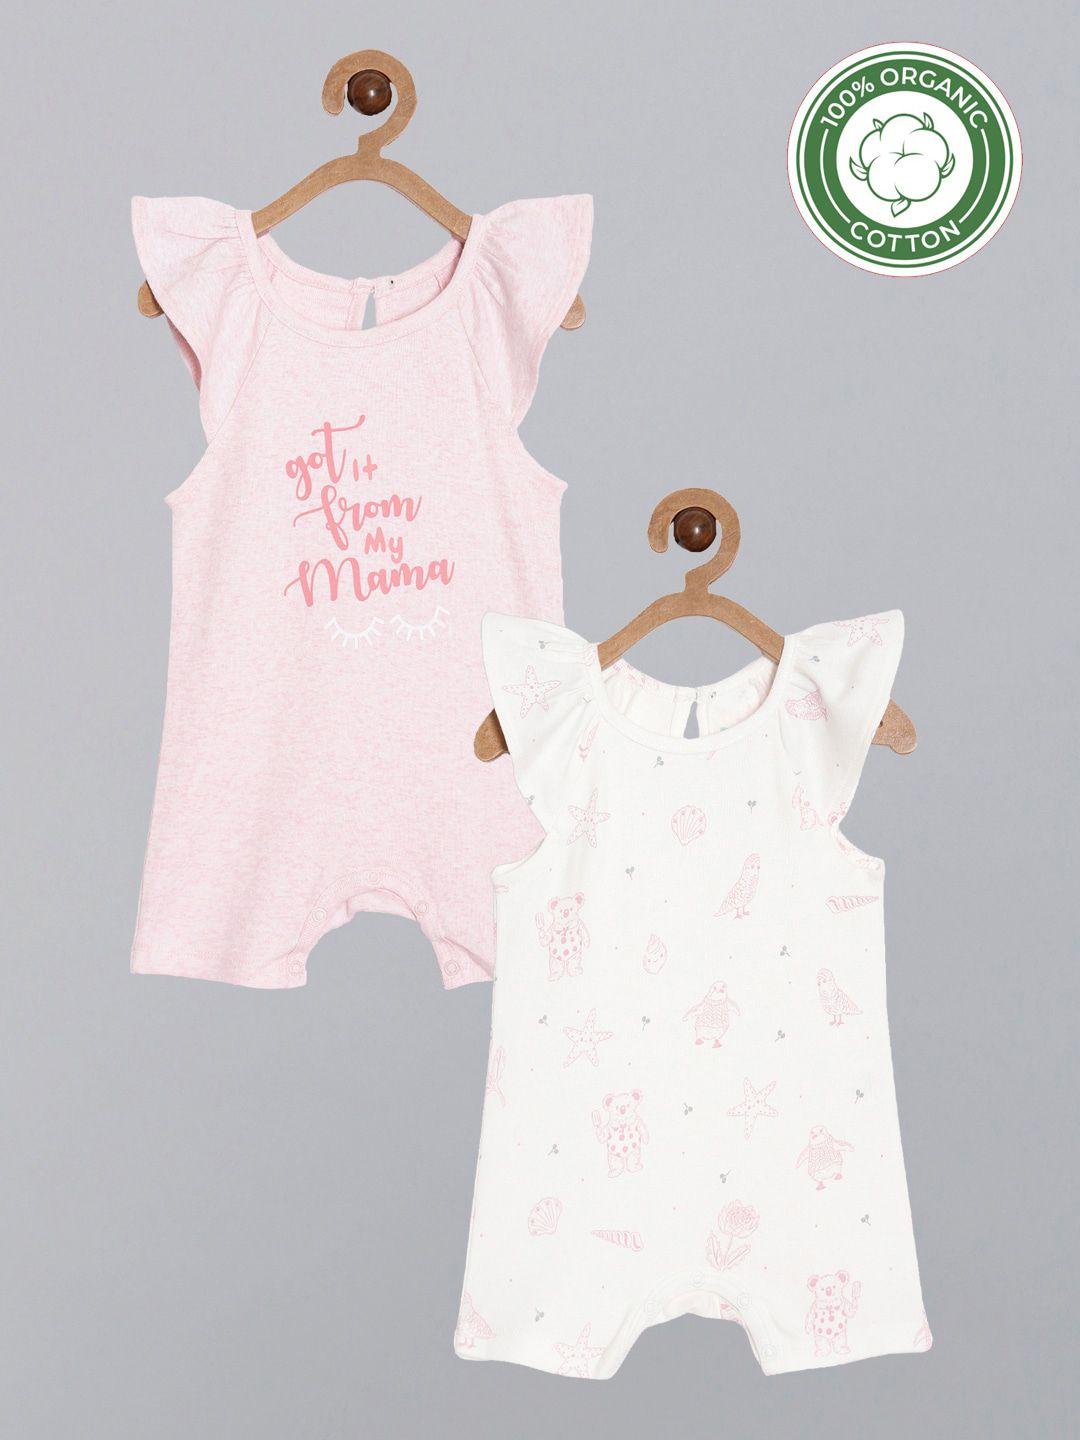 broon-infant-kids-set-of-2-pink-and-off-white-printed-organic-cotton-rompers